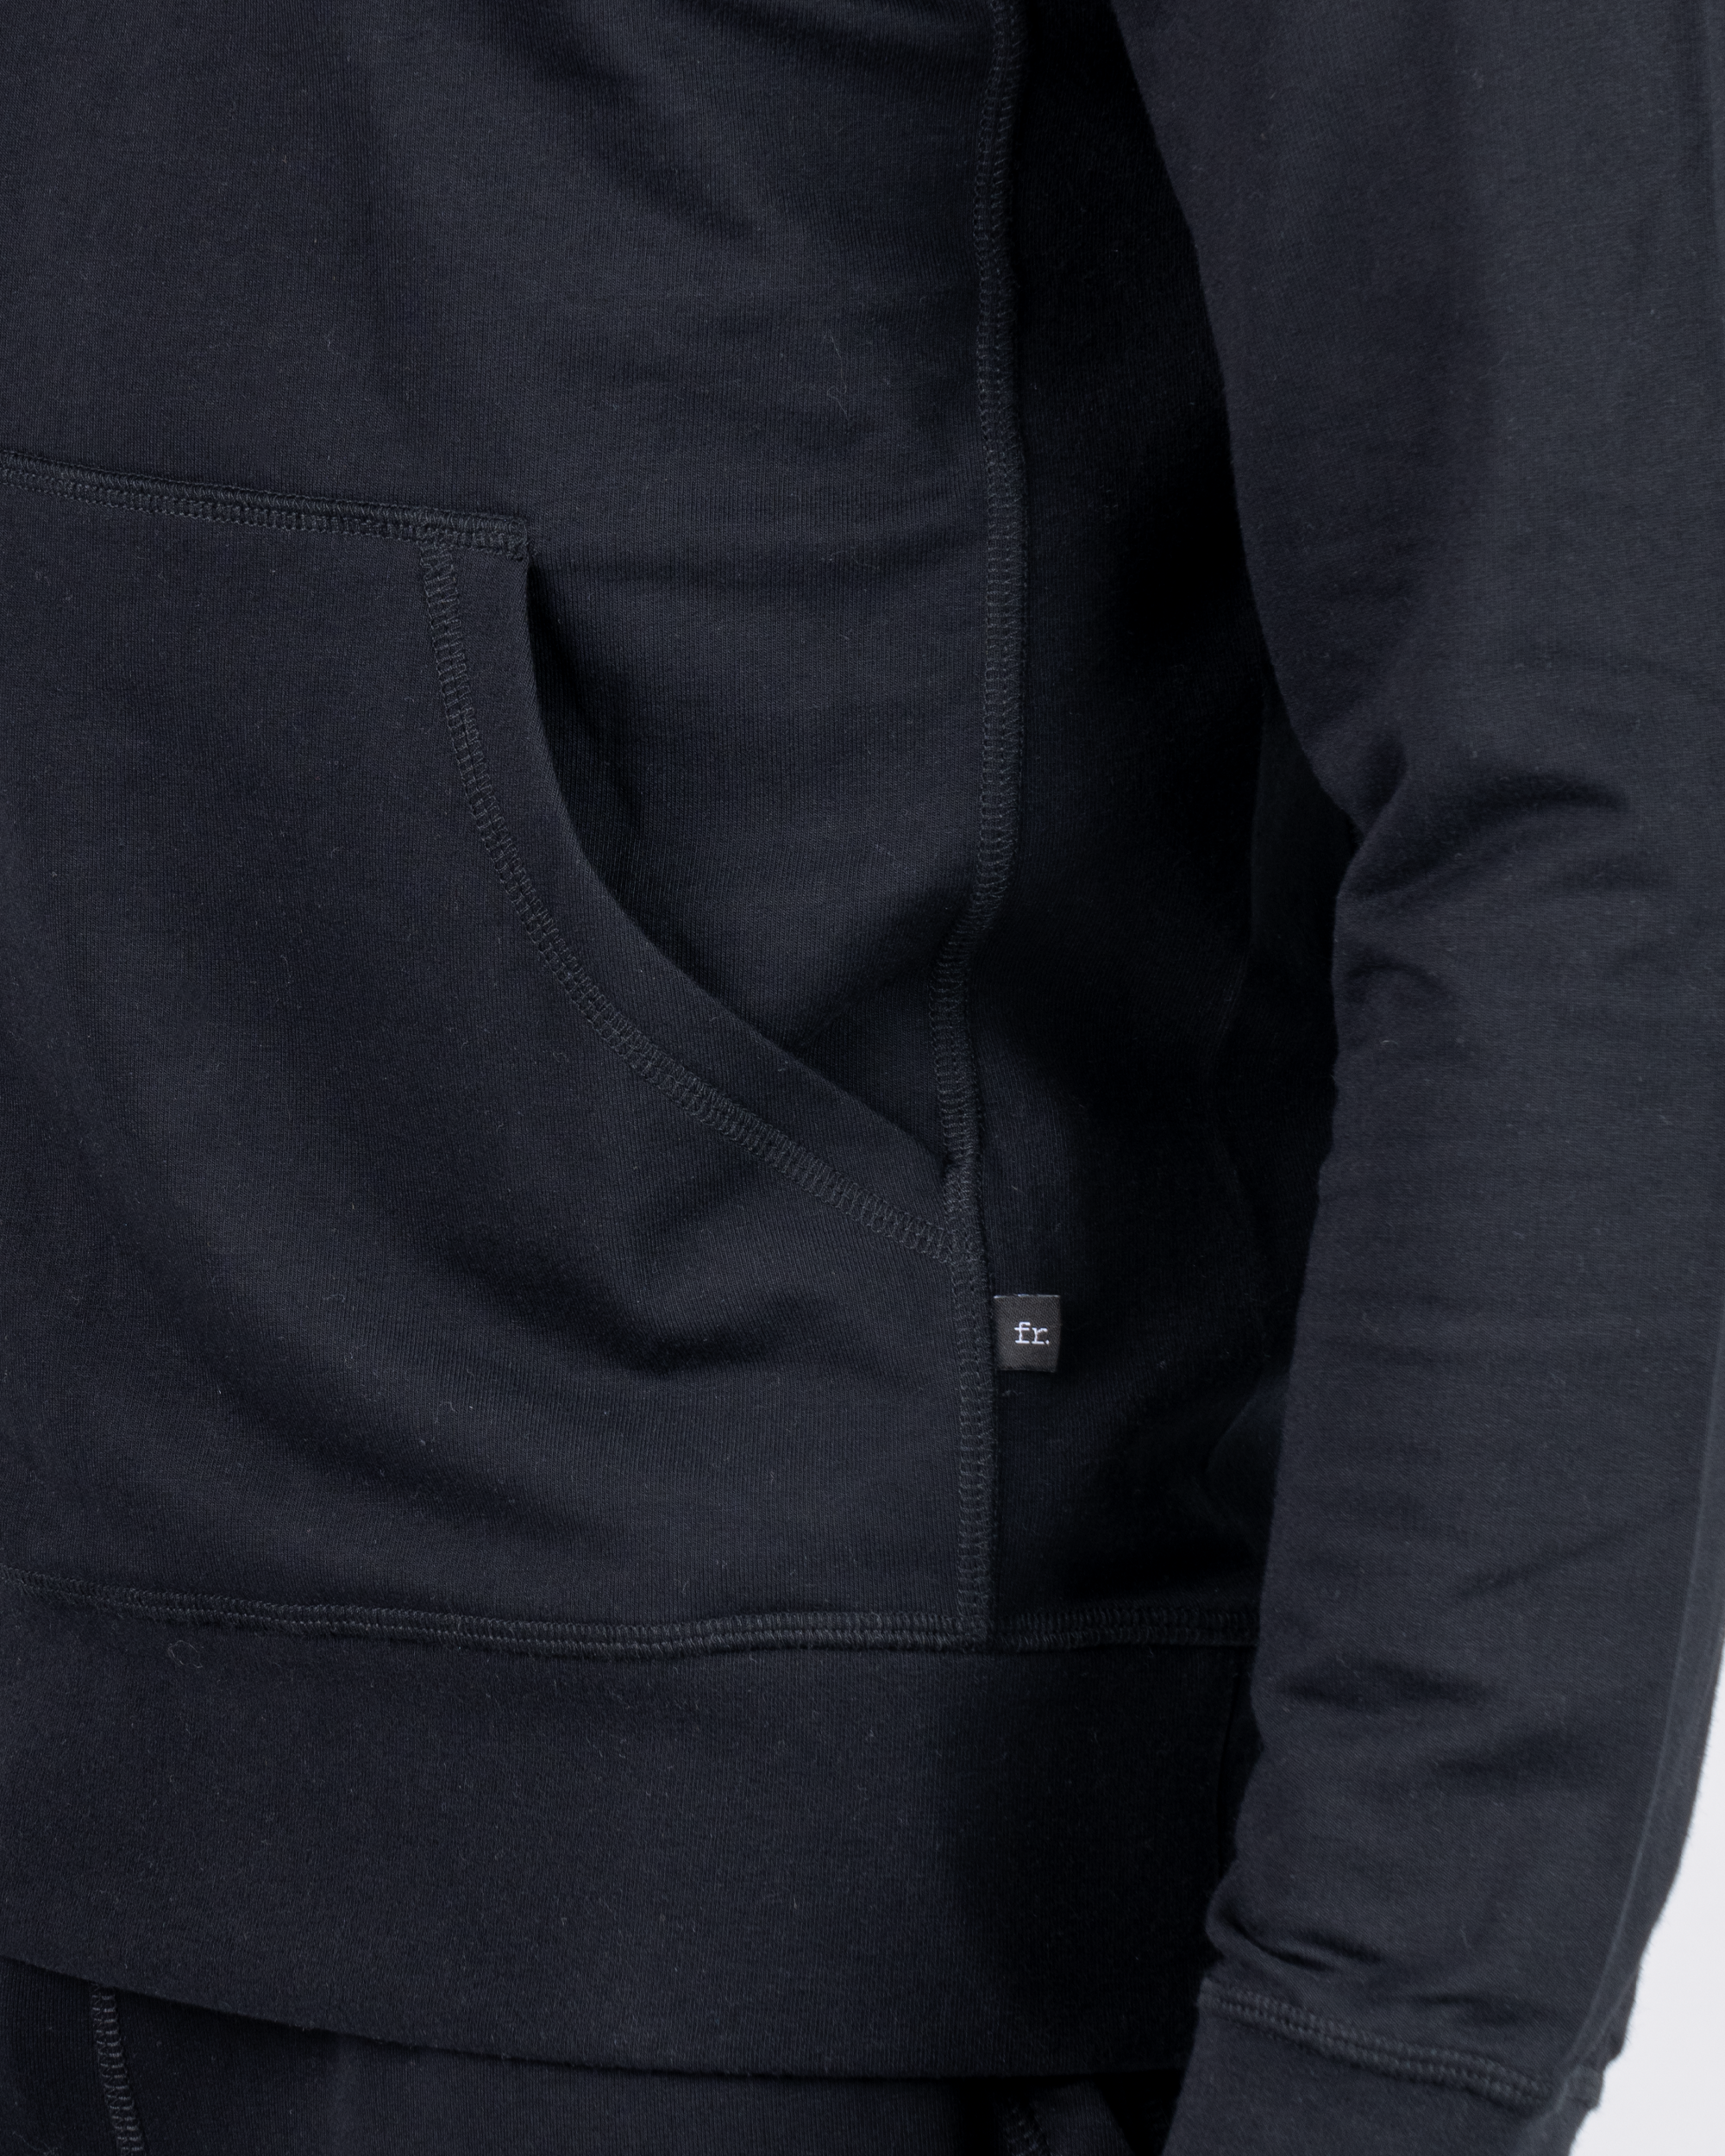 Foreign Rider Co Technical Fabric Black Hoodie Bottom Front Pocket Detail